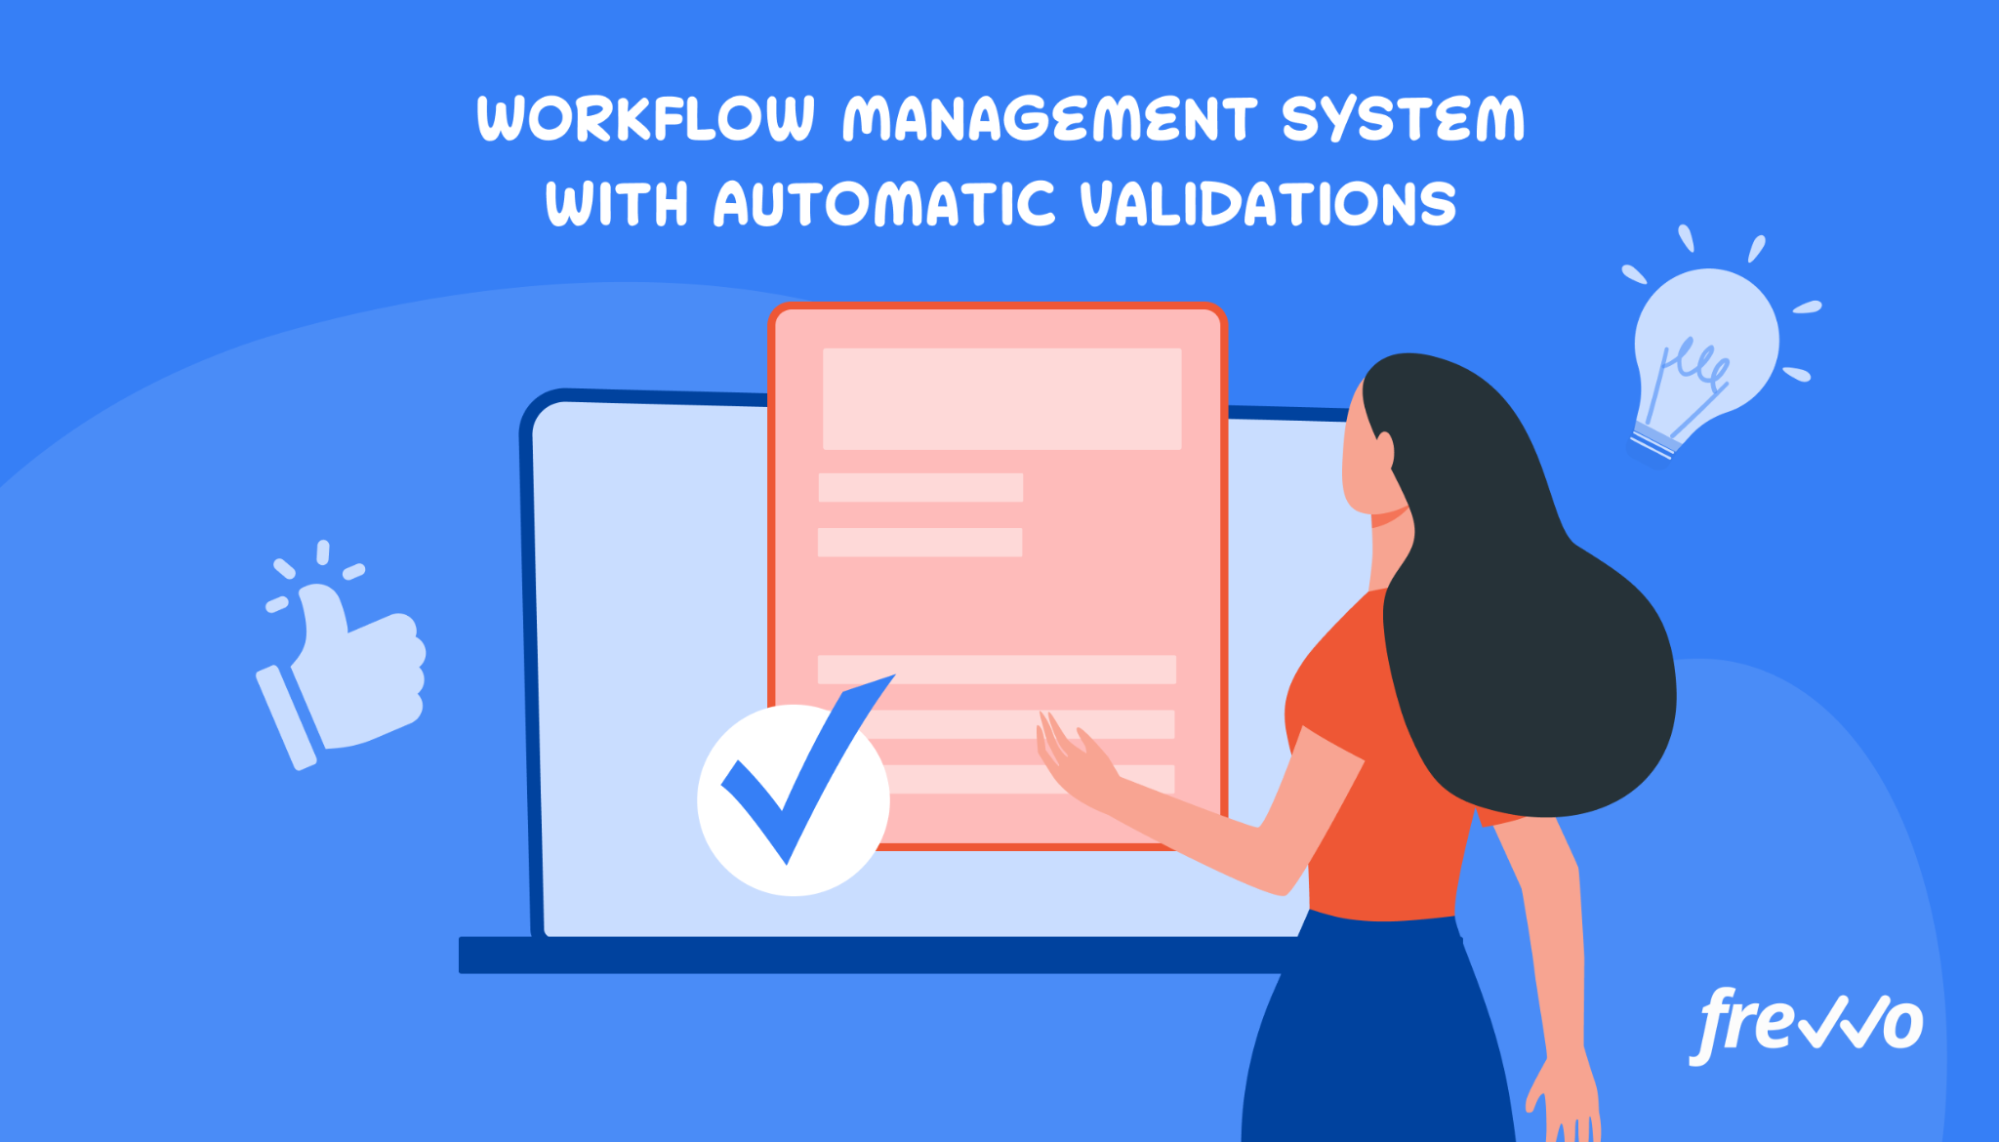 Workflow tool with validation features